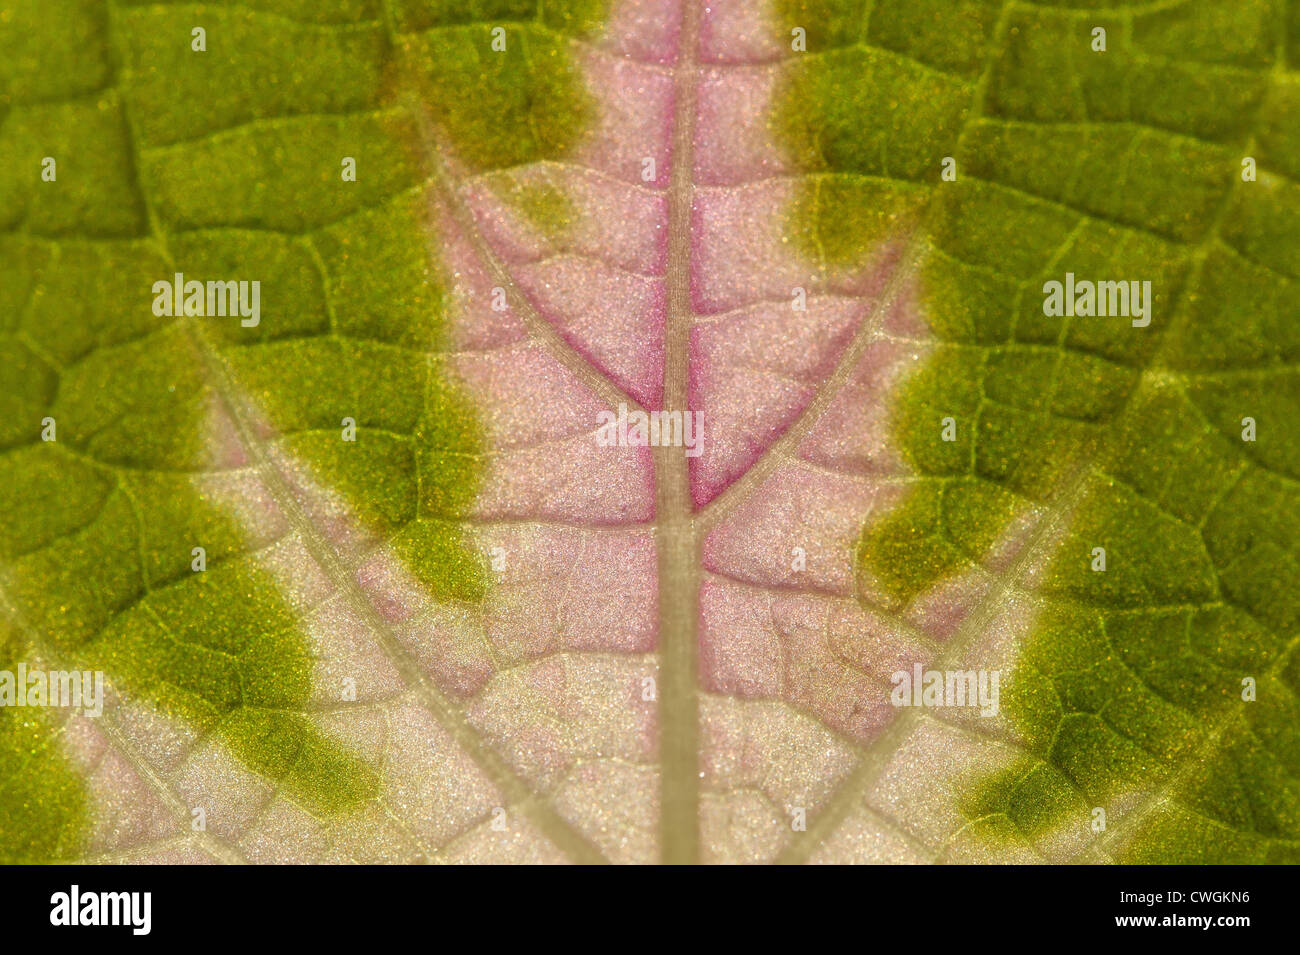 Leaf of coleus, plant that has mild relaxing and hallucinogenic effects Stock Photo